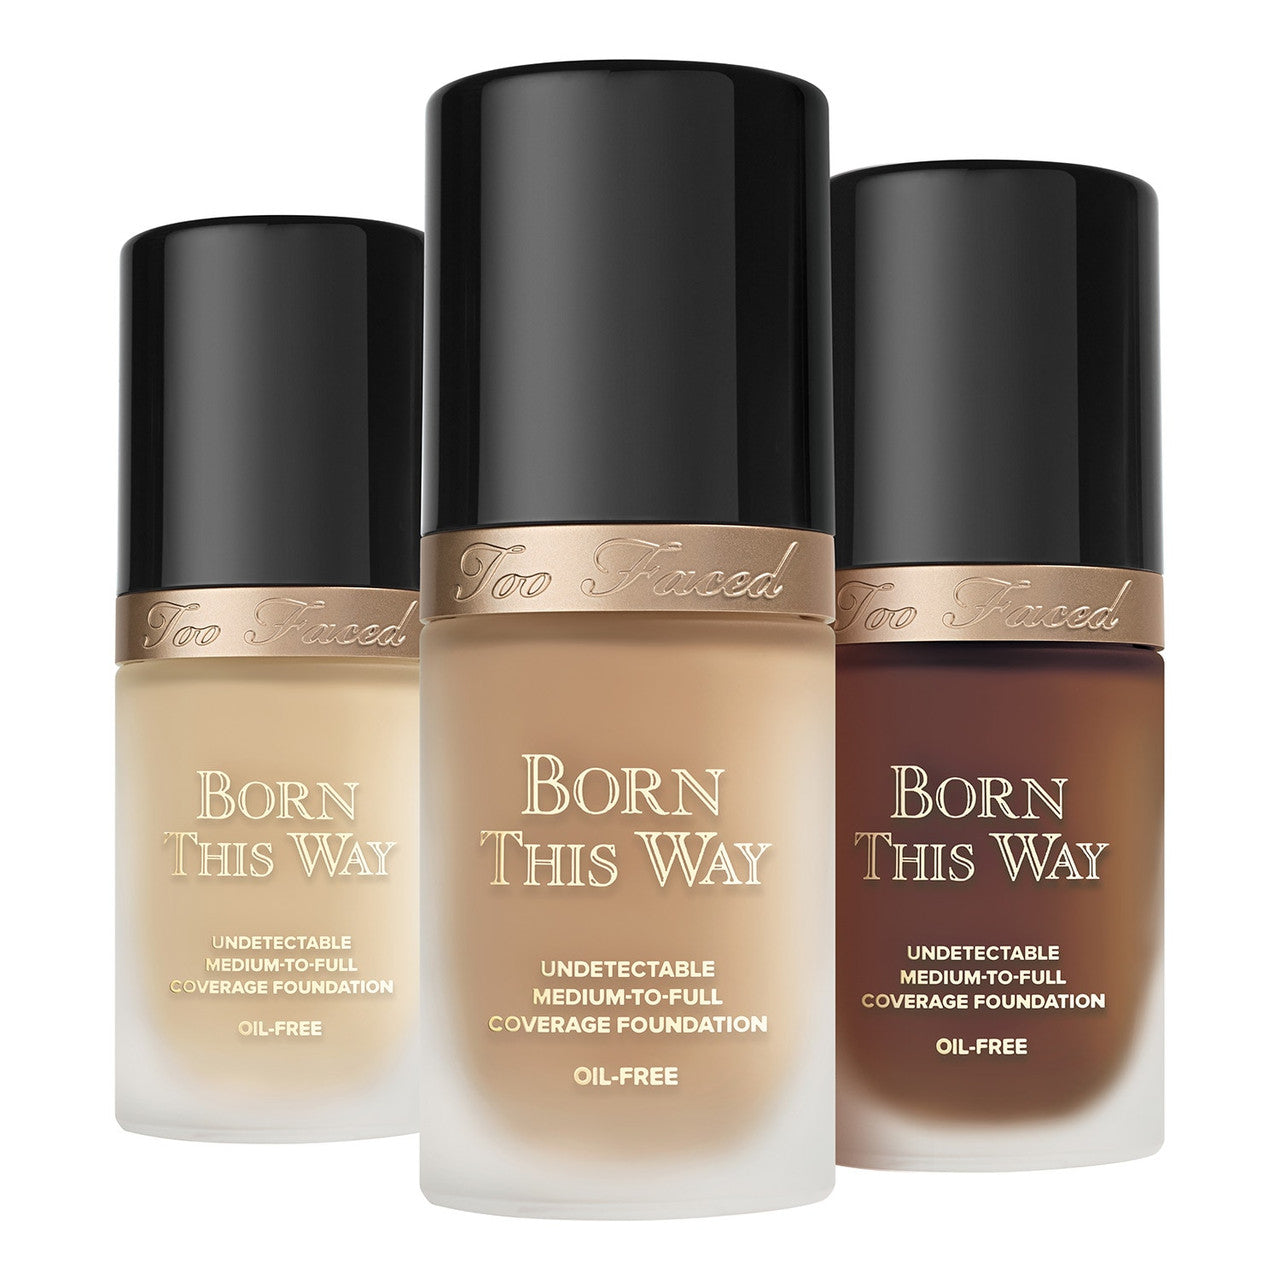 too-faced-born-this-way-foundation-fond-de-teint-couvrance-indetectable-ref-ivory-30ml